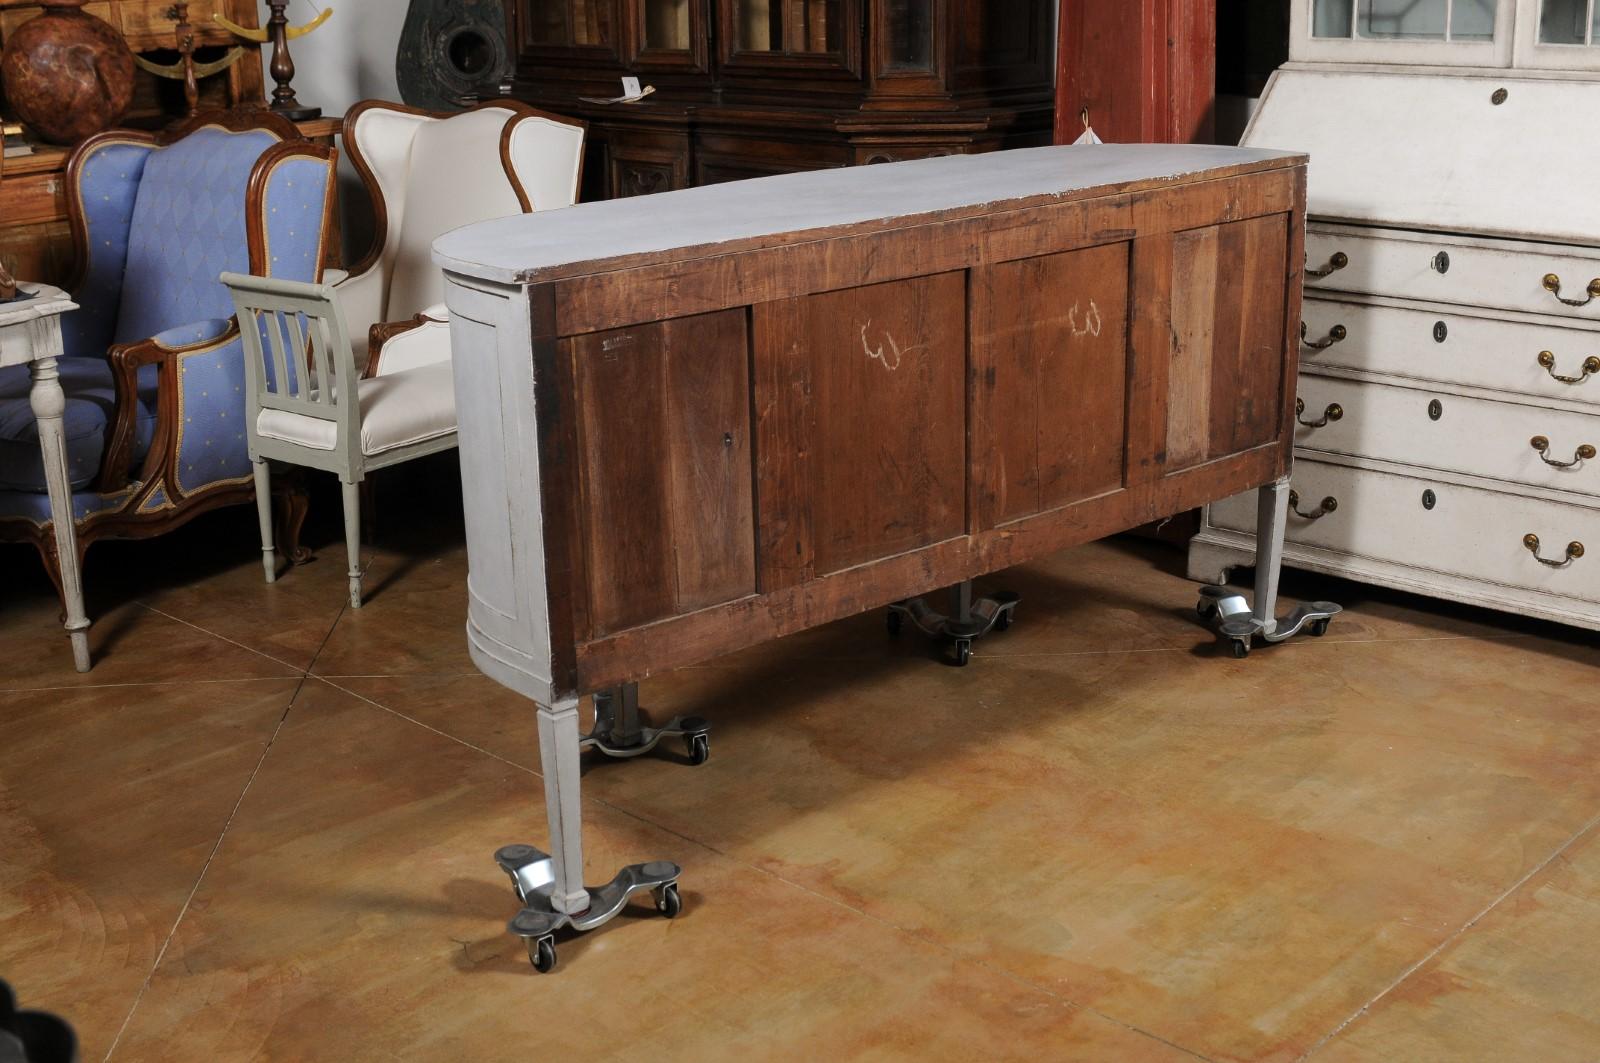 A European painted demillune sideboard from the early 19th century, with three drawers and rounded doors. Created in Europe during the second quarter of the 19th century, this painted sideboard features a semi-circular top with protruding front,